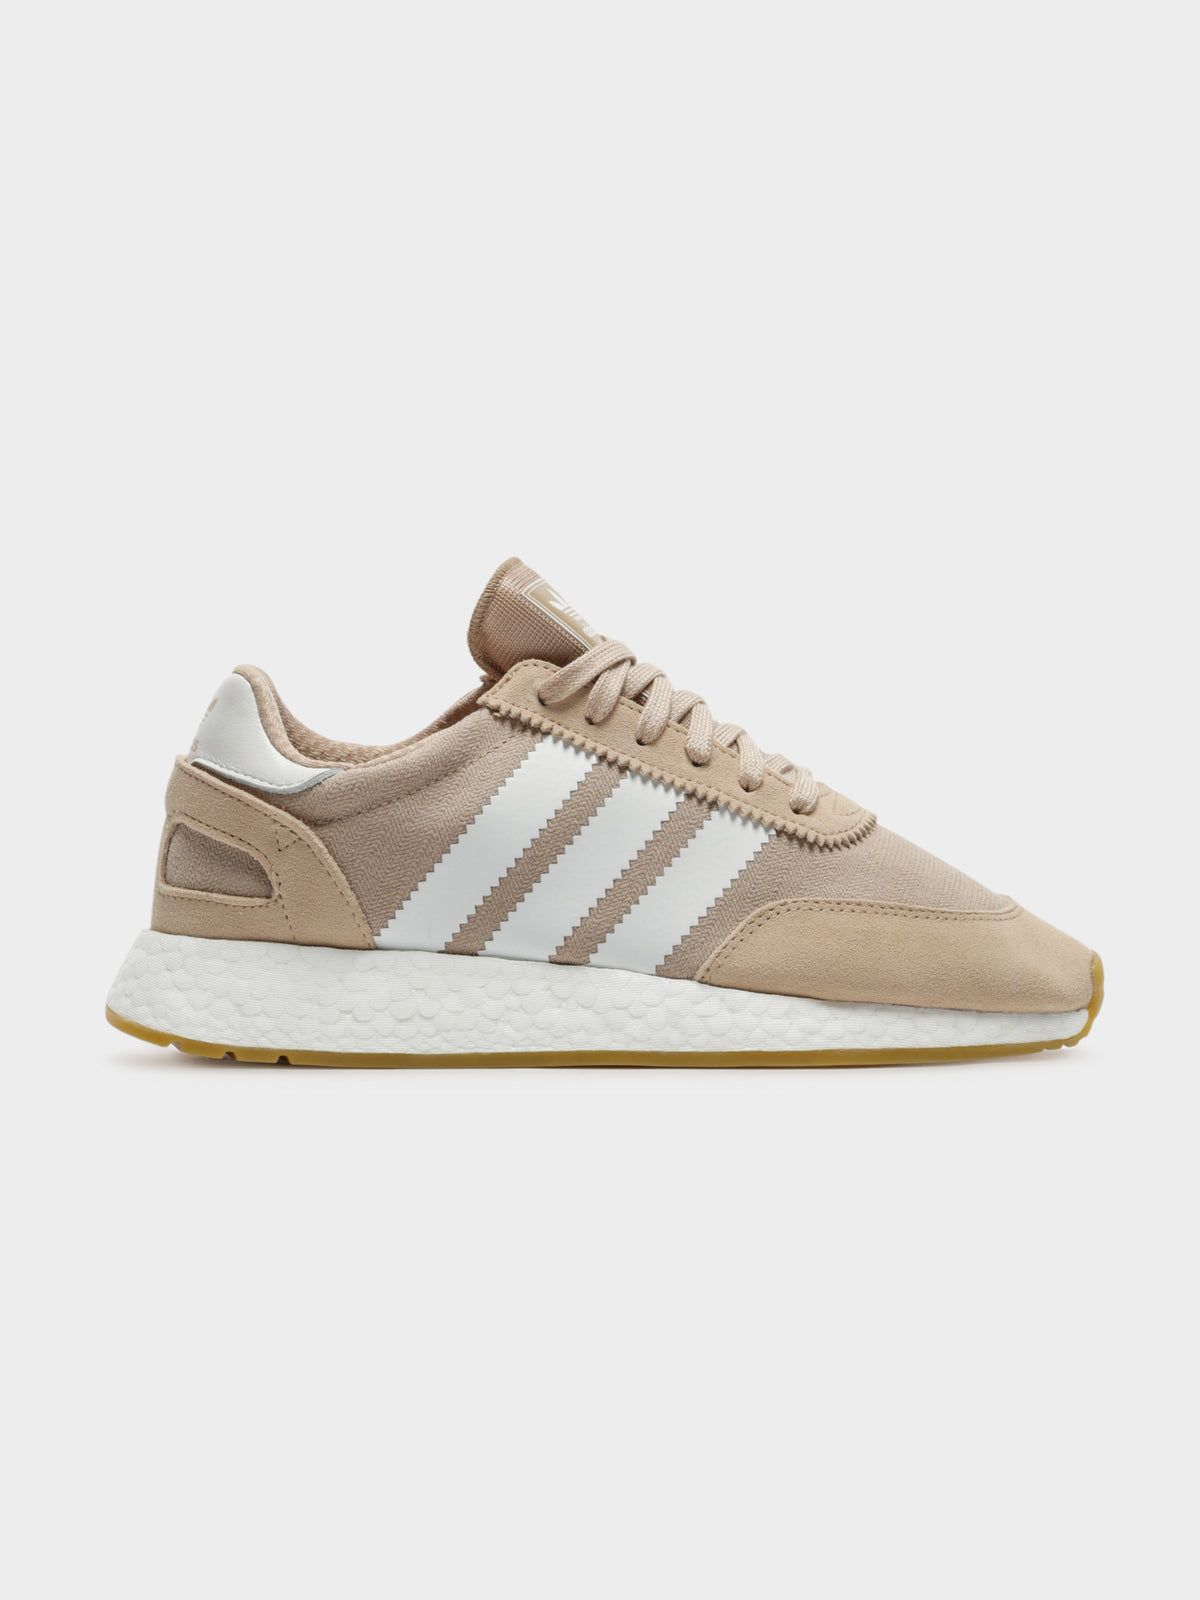 Womens I-5923 Sneakers in Nude